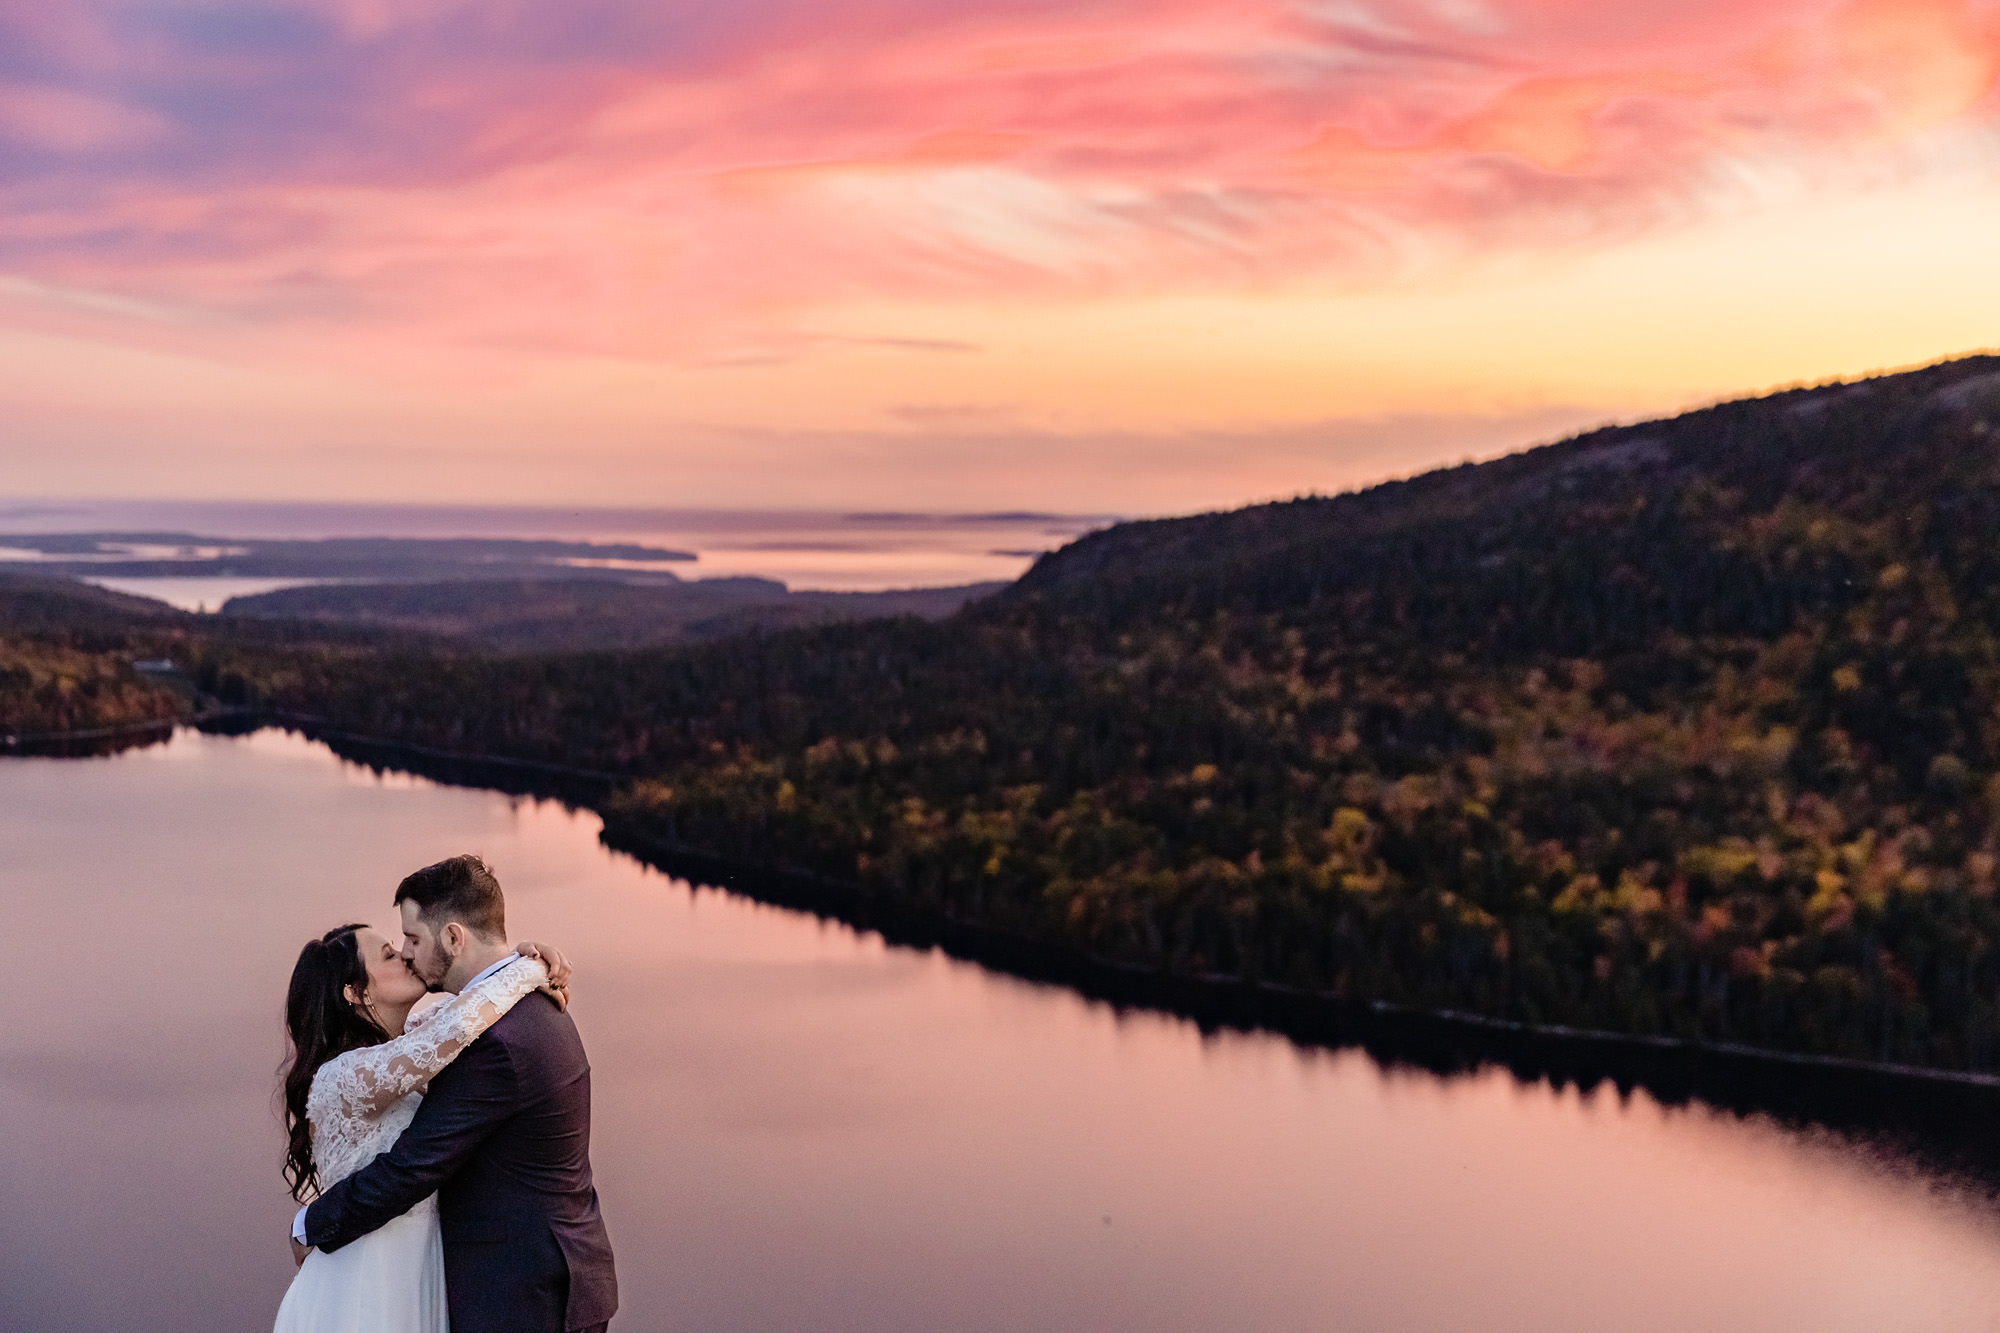 Mountaintop wedding portraits at sunset in Acadia National Park